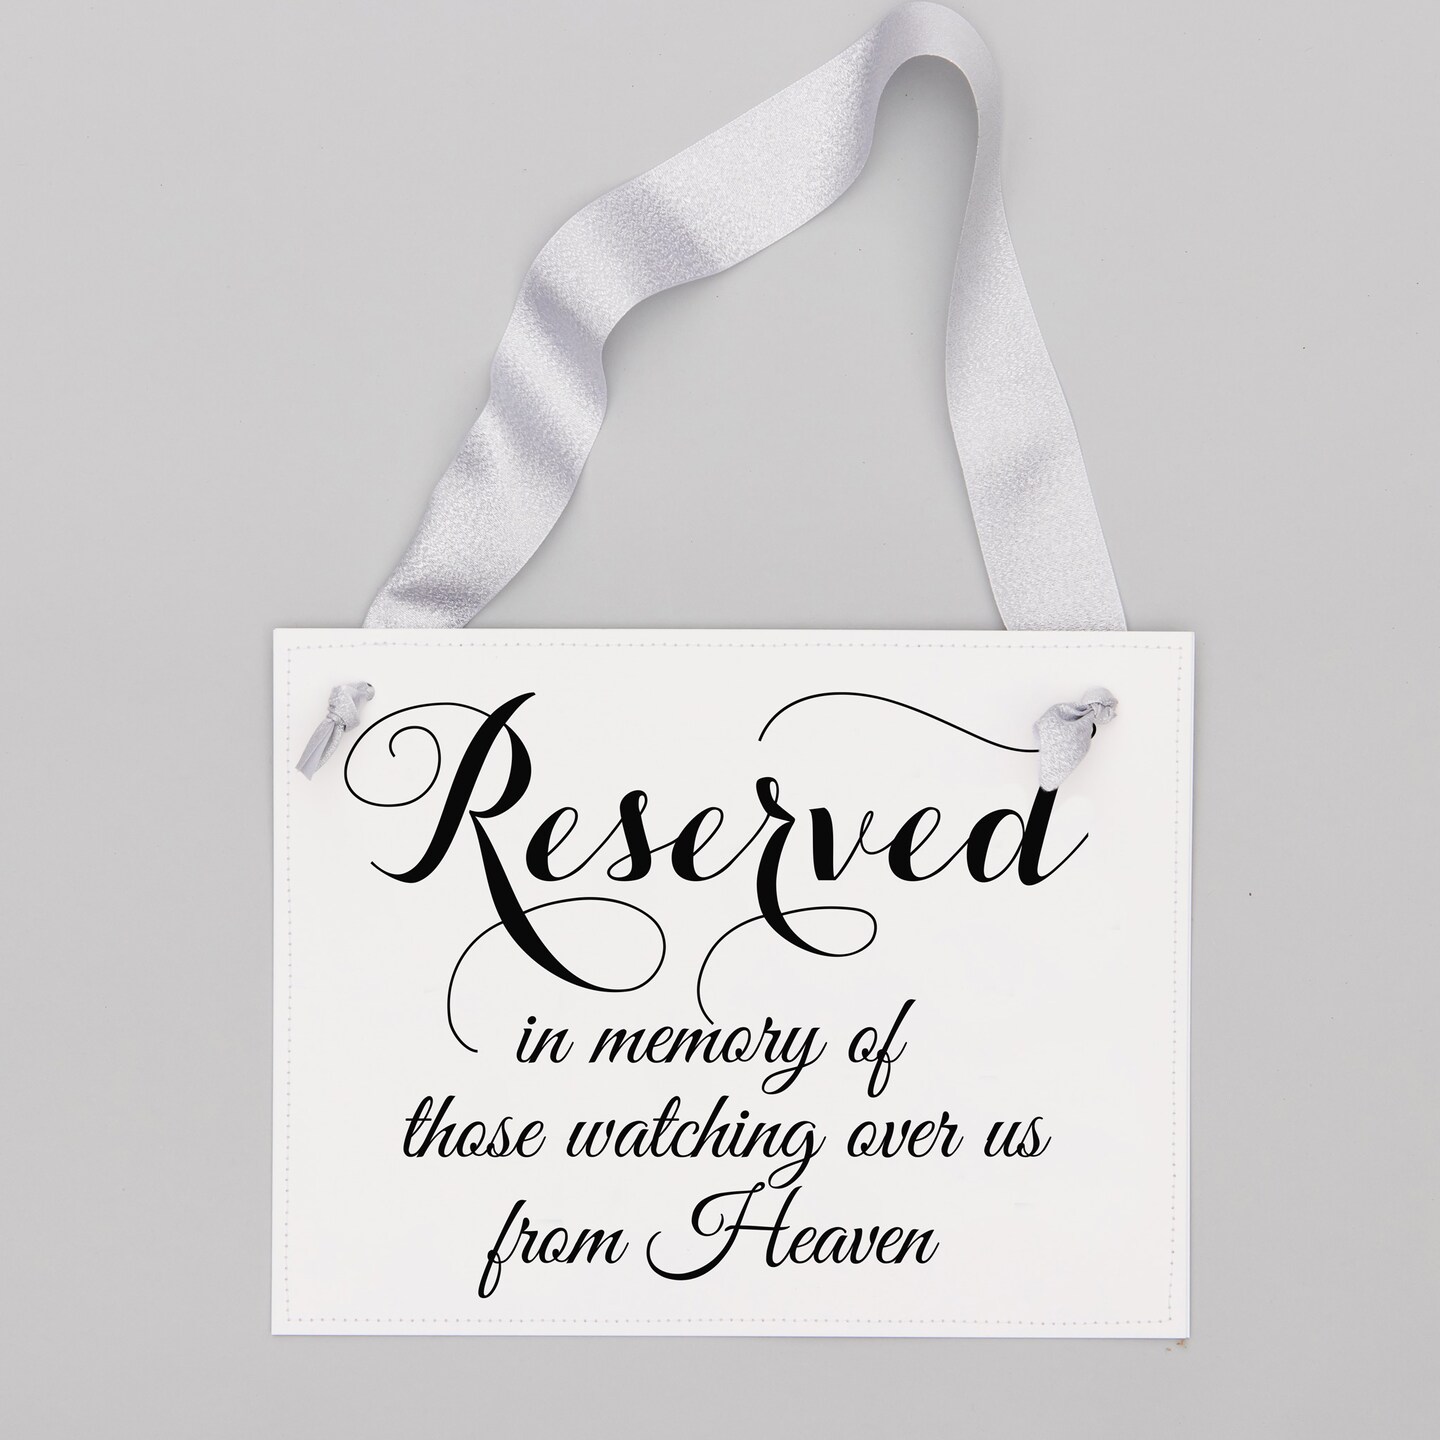 Ritzy Rose Memorial Chair Sign - Black on 11x8in White Linen Cardstock with Metallic Silver Ribbon